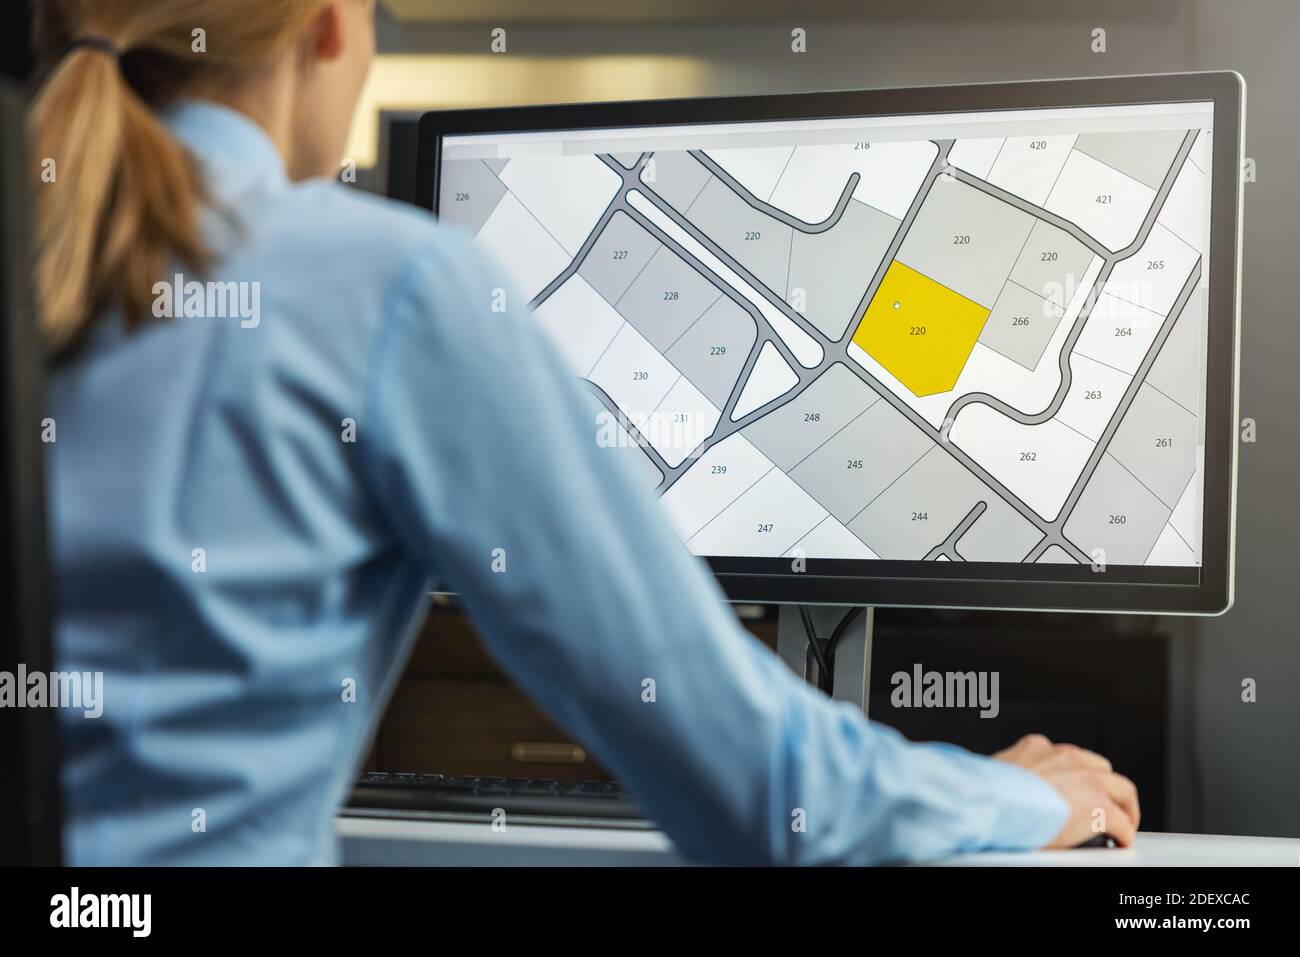 woman working with digital cadastral map land register database on computer in office Stock Photo